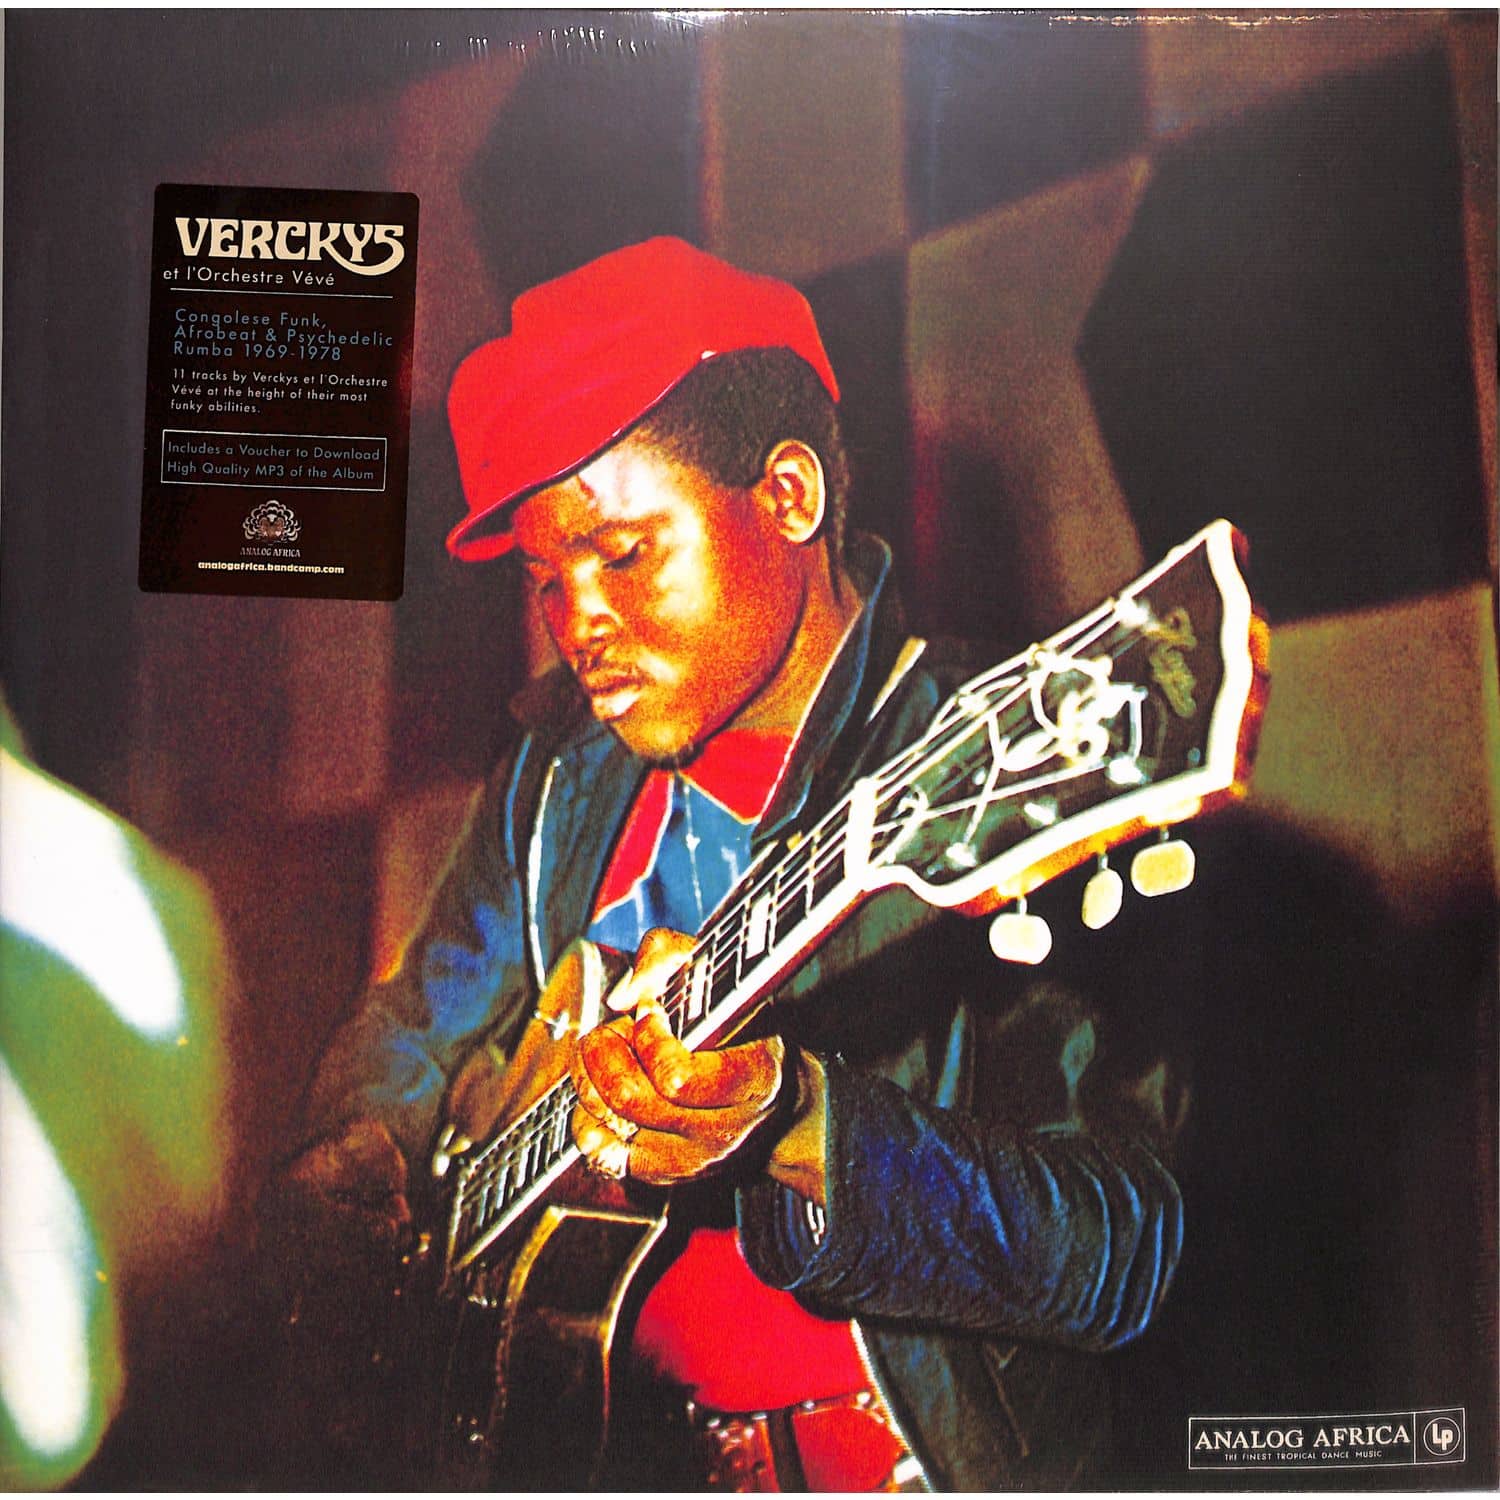 Verckys & Orchestre Veve - CONGOLESE FUNK AFROBEAT AND PSYCHEDELIC RUMBA